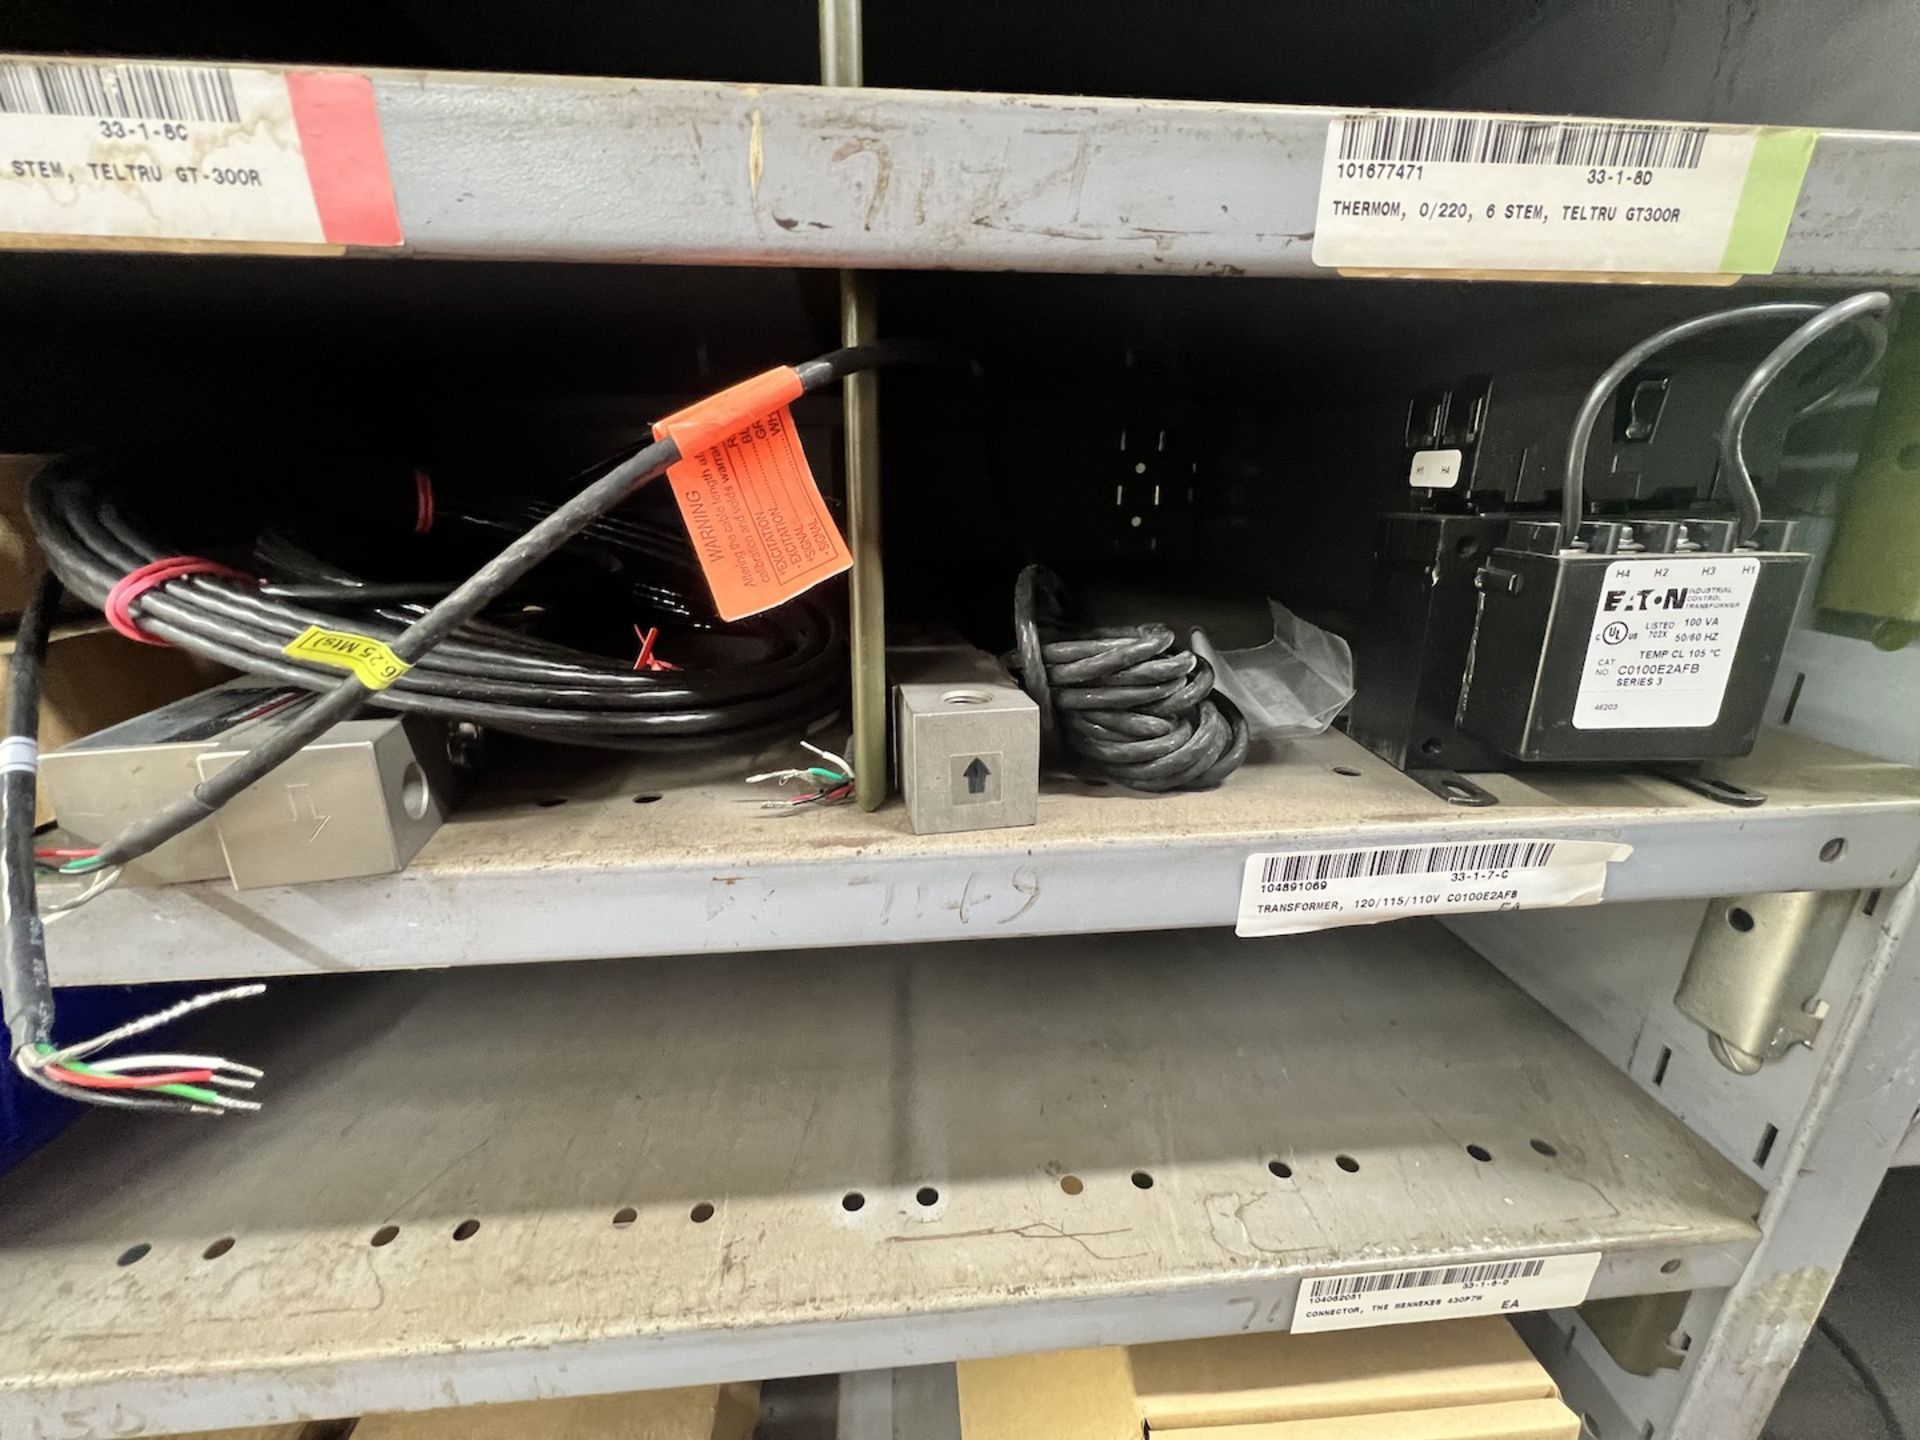 LOT OF ASSORTED MRO, CONTENTS ON 1-CABINET, INCLUDES NEW LOAD CELLS, FIRE RODS, ROSEMONT SENSORS - Image 13 of 23